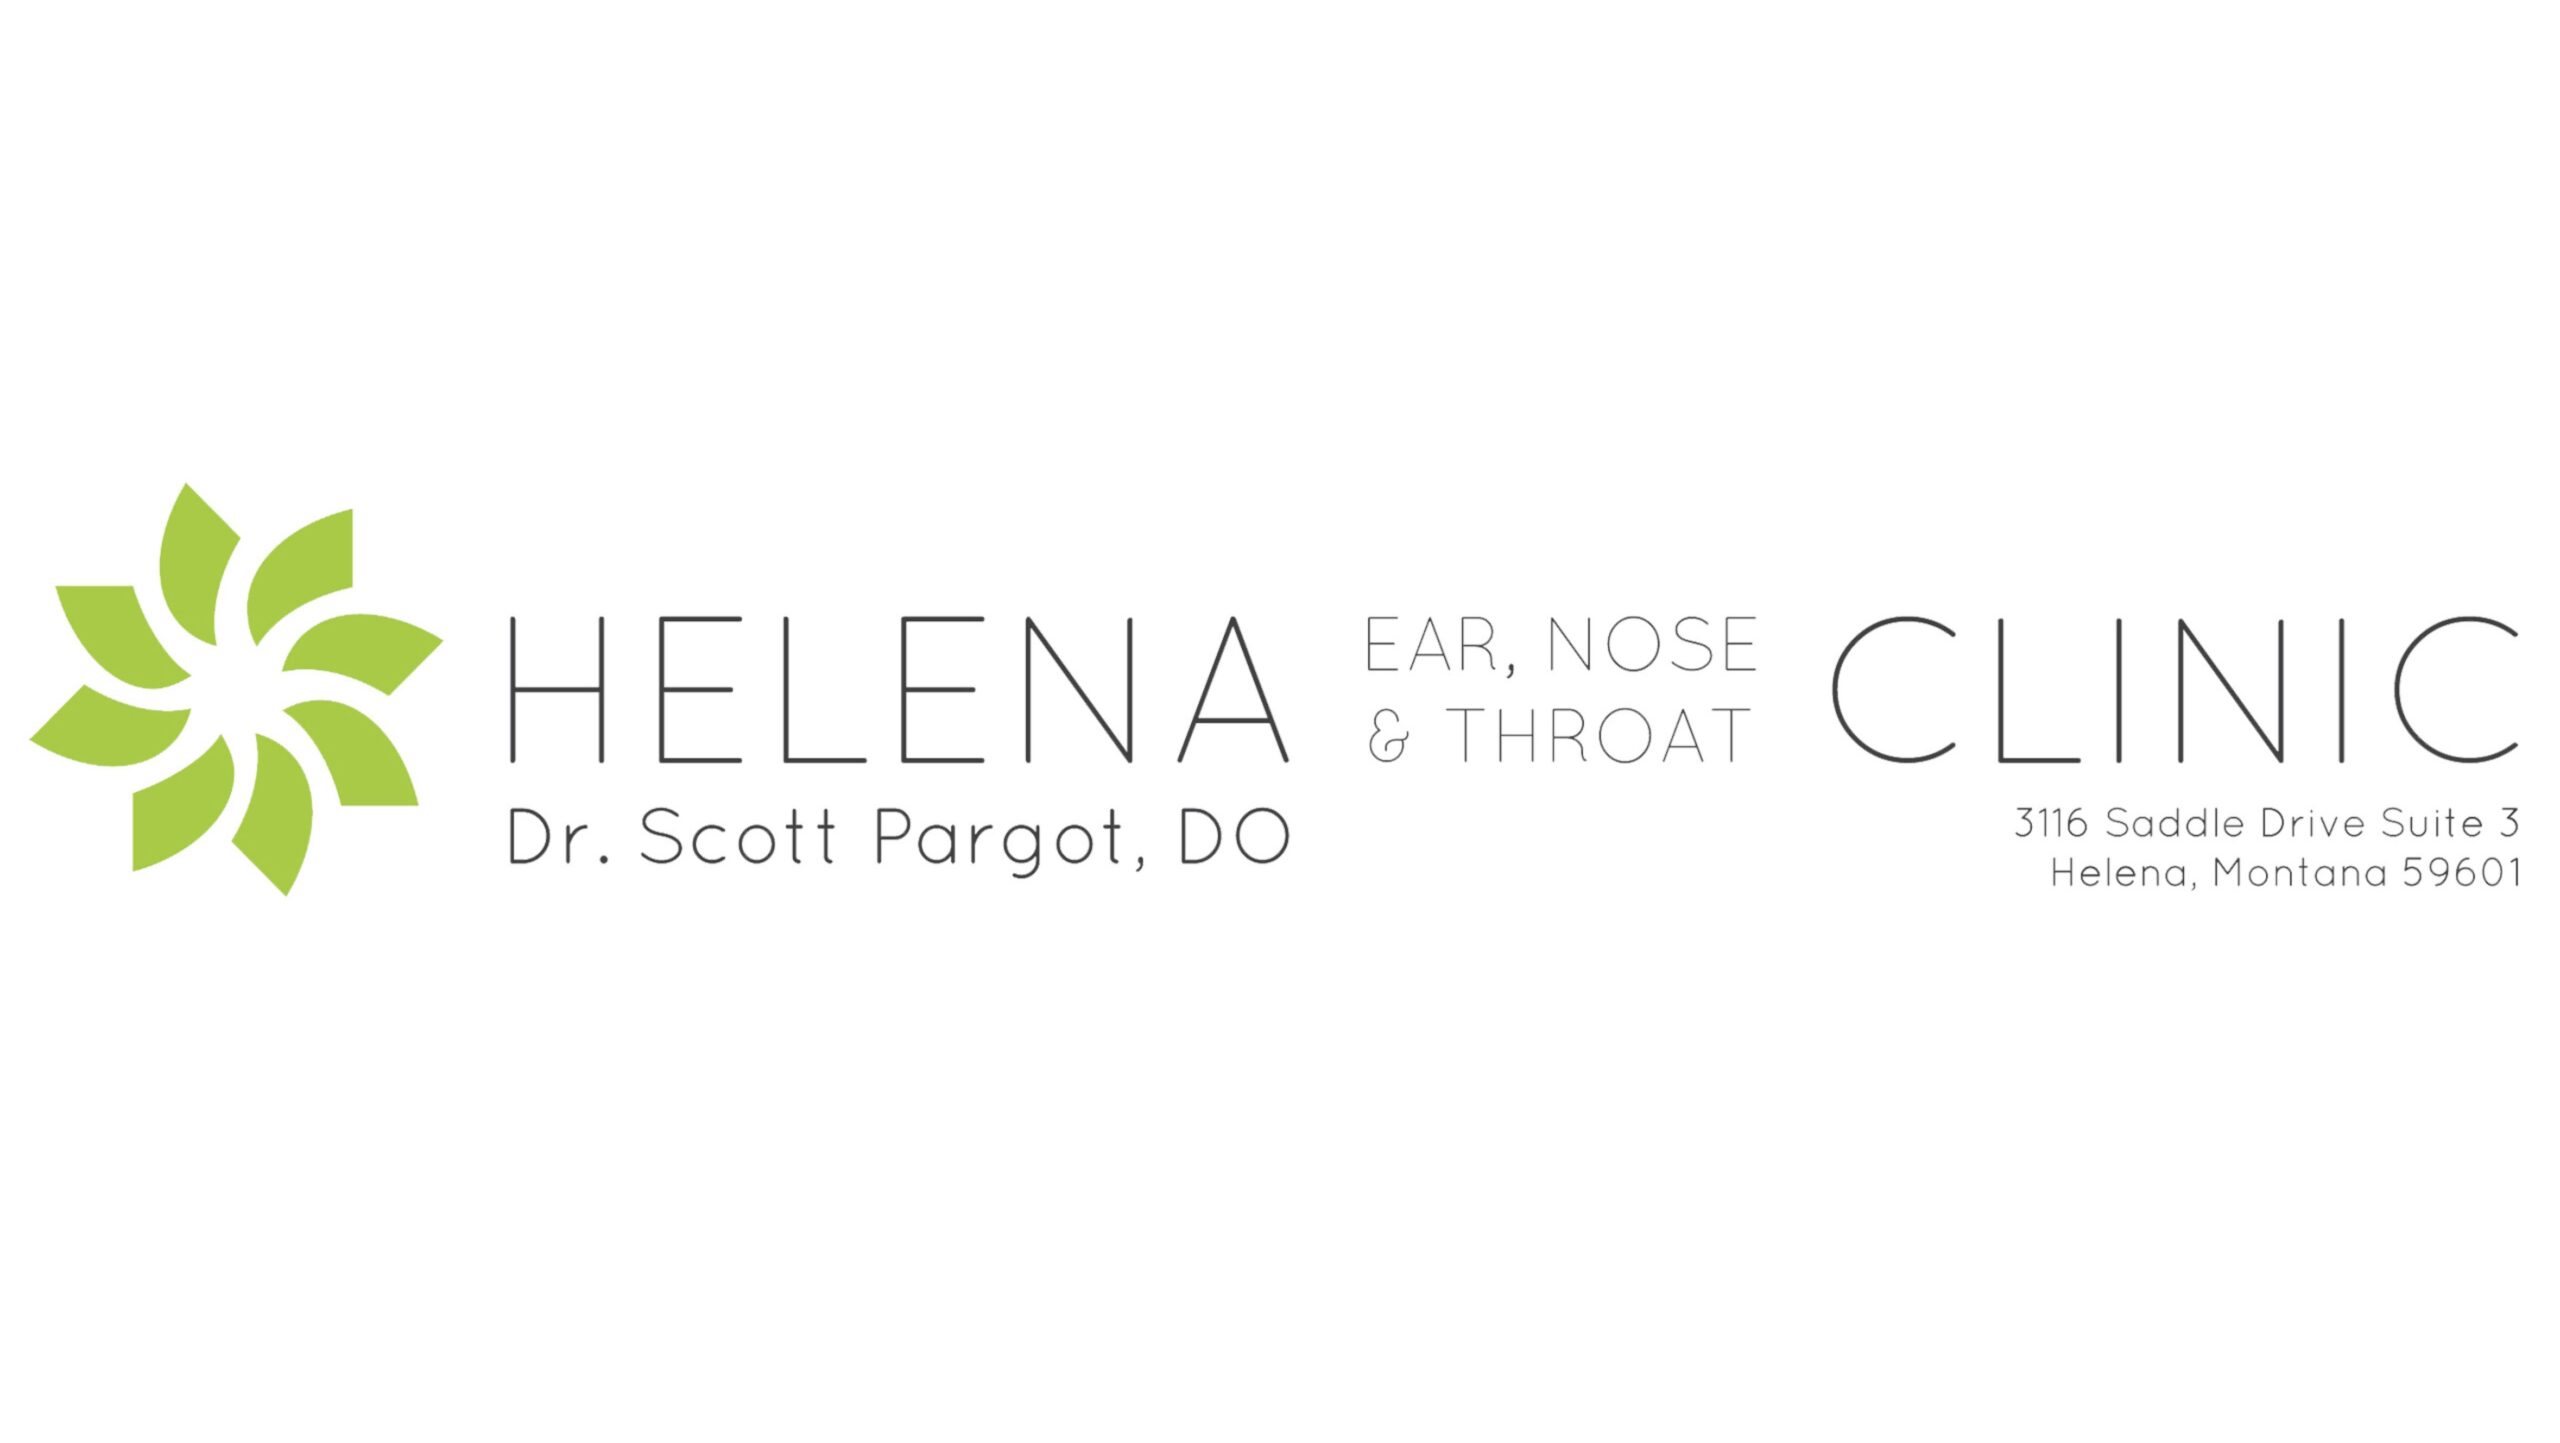 Helena Ears, Nose, and Throat Clinic